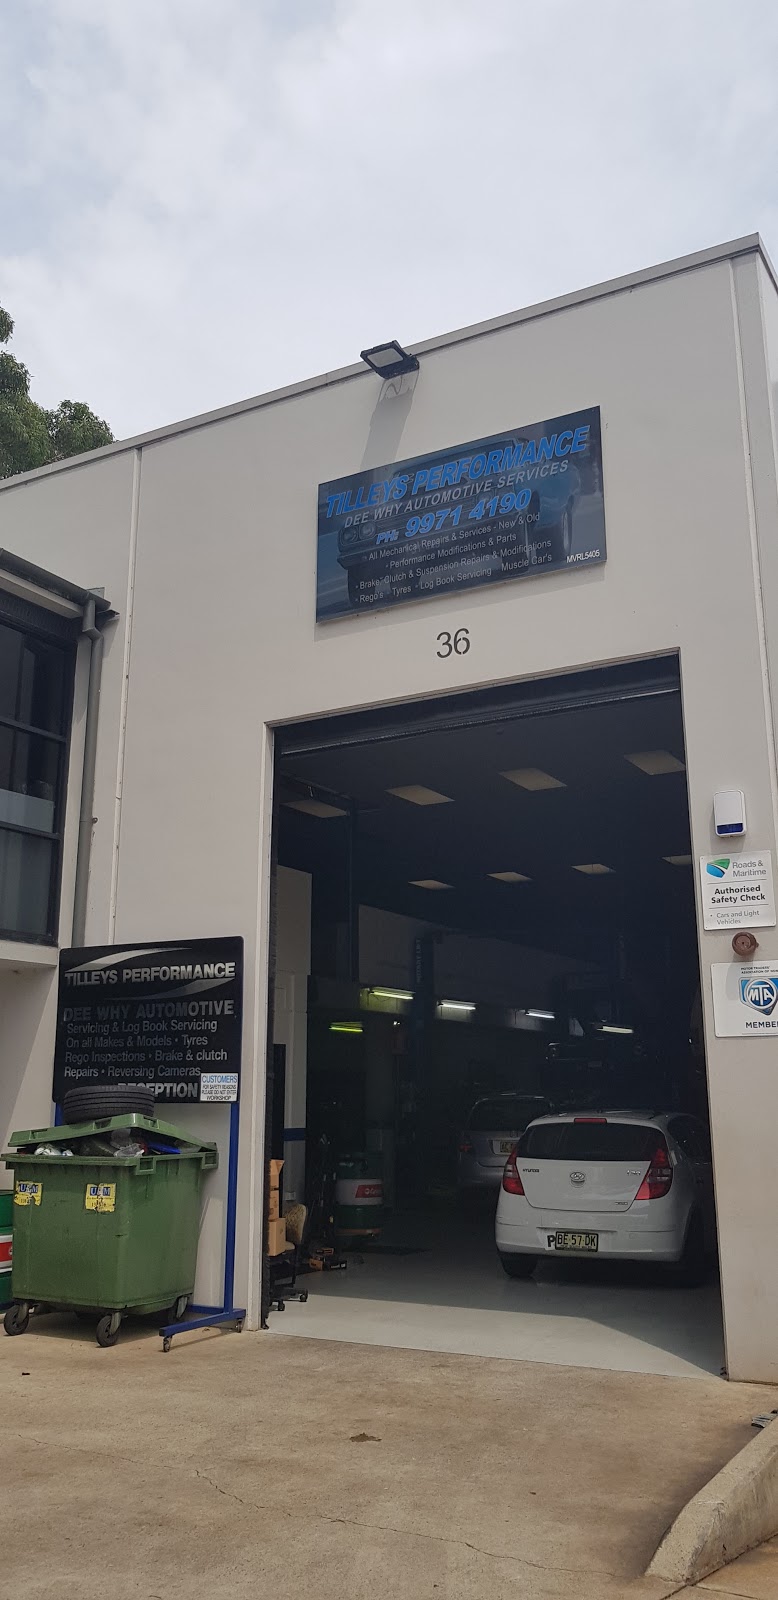 Tilleys Performance Dee Why Automotive Services | car repair | 36/176 S Creek Rd, Cromer NSW 2099, Australia | 0299714190 OR +61 2 9971 4190